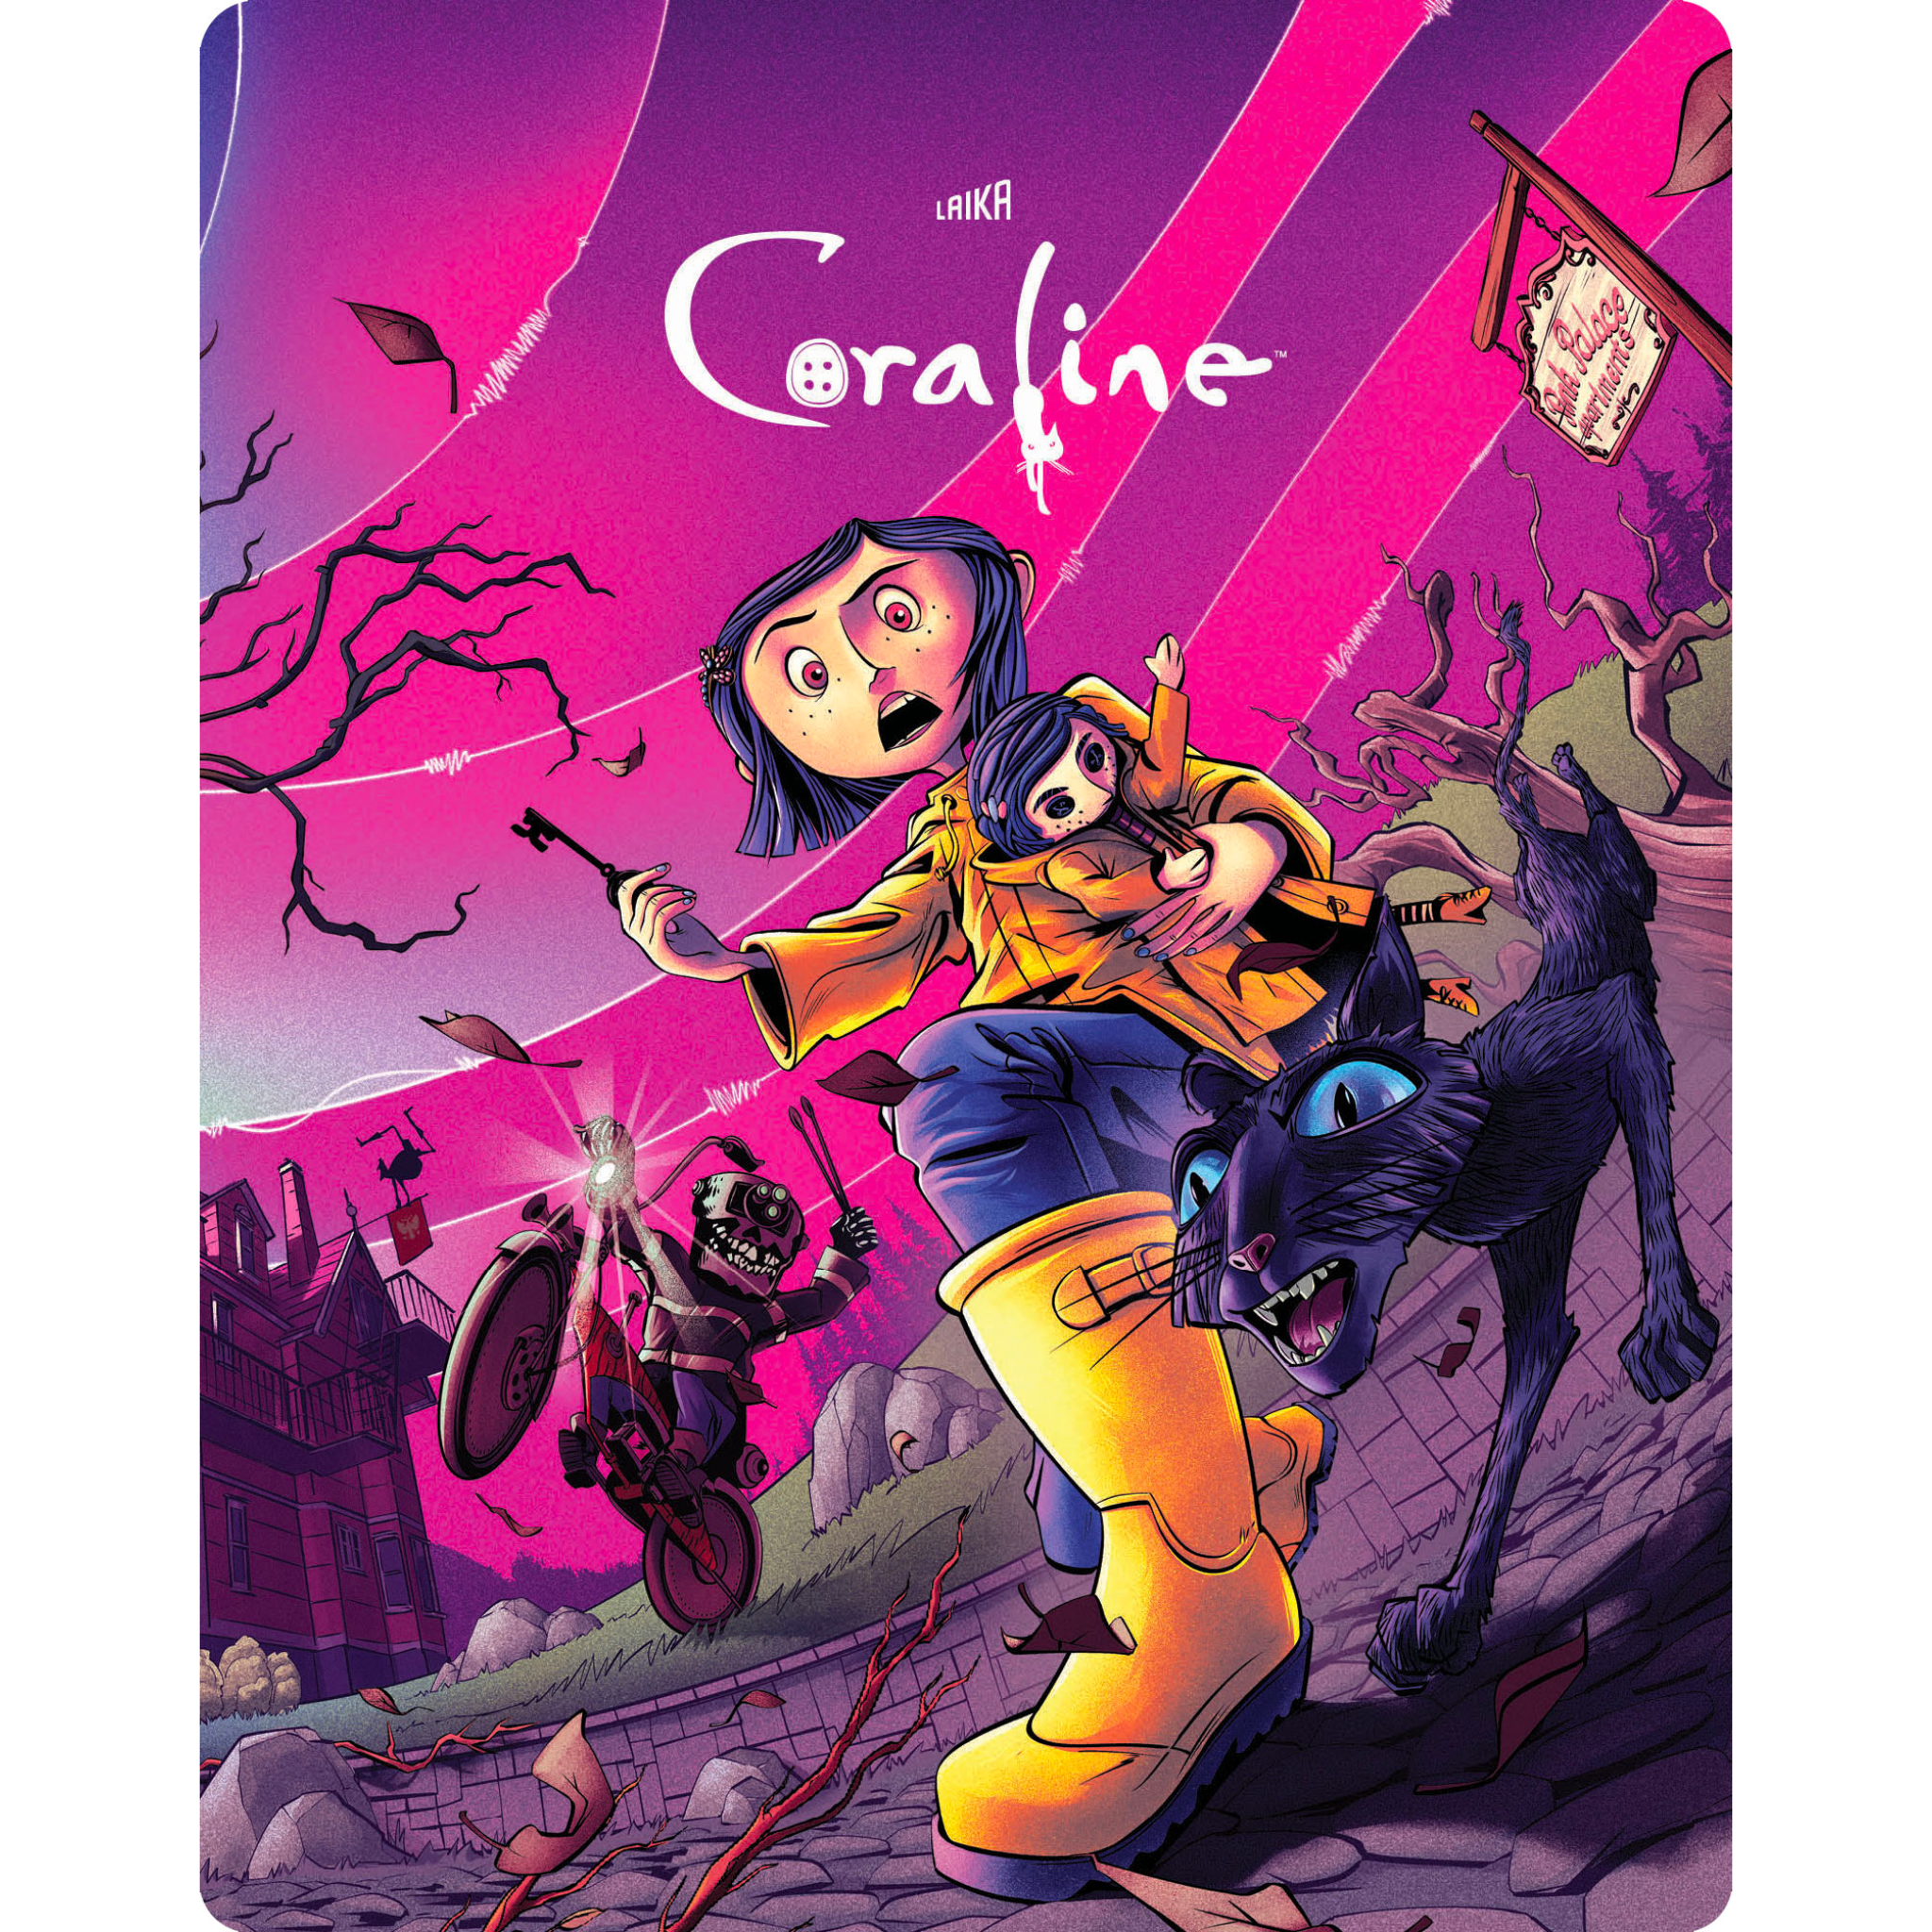 Coraline' embarks on magical adventure